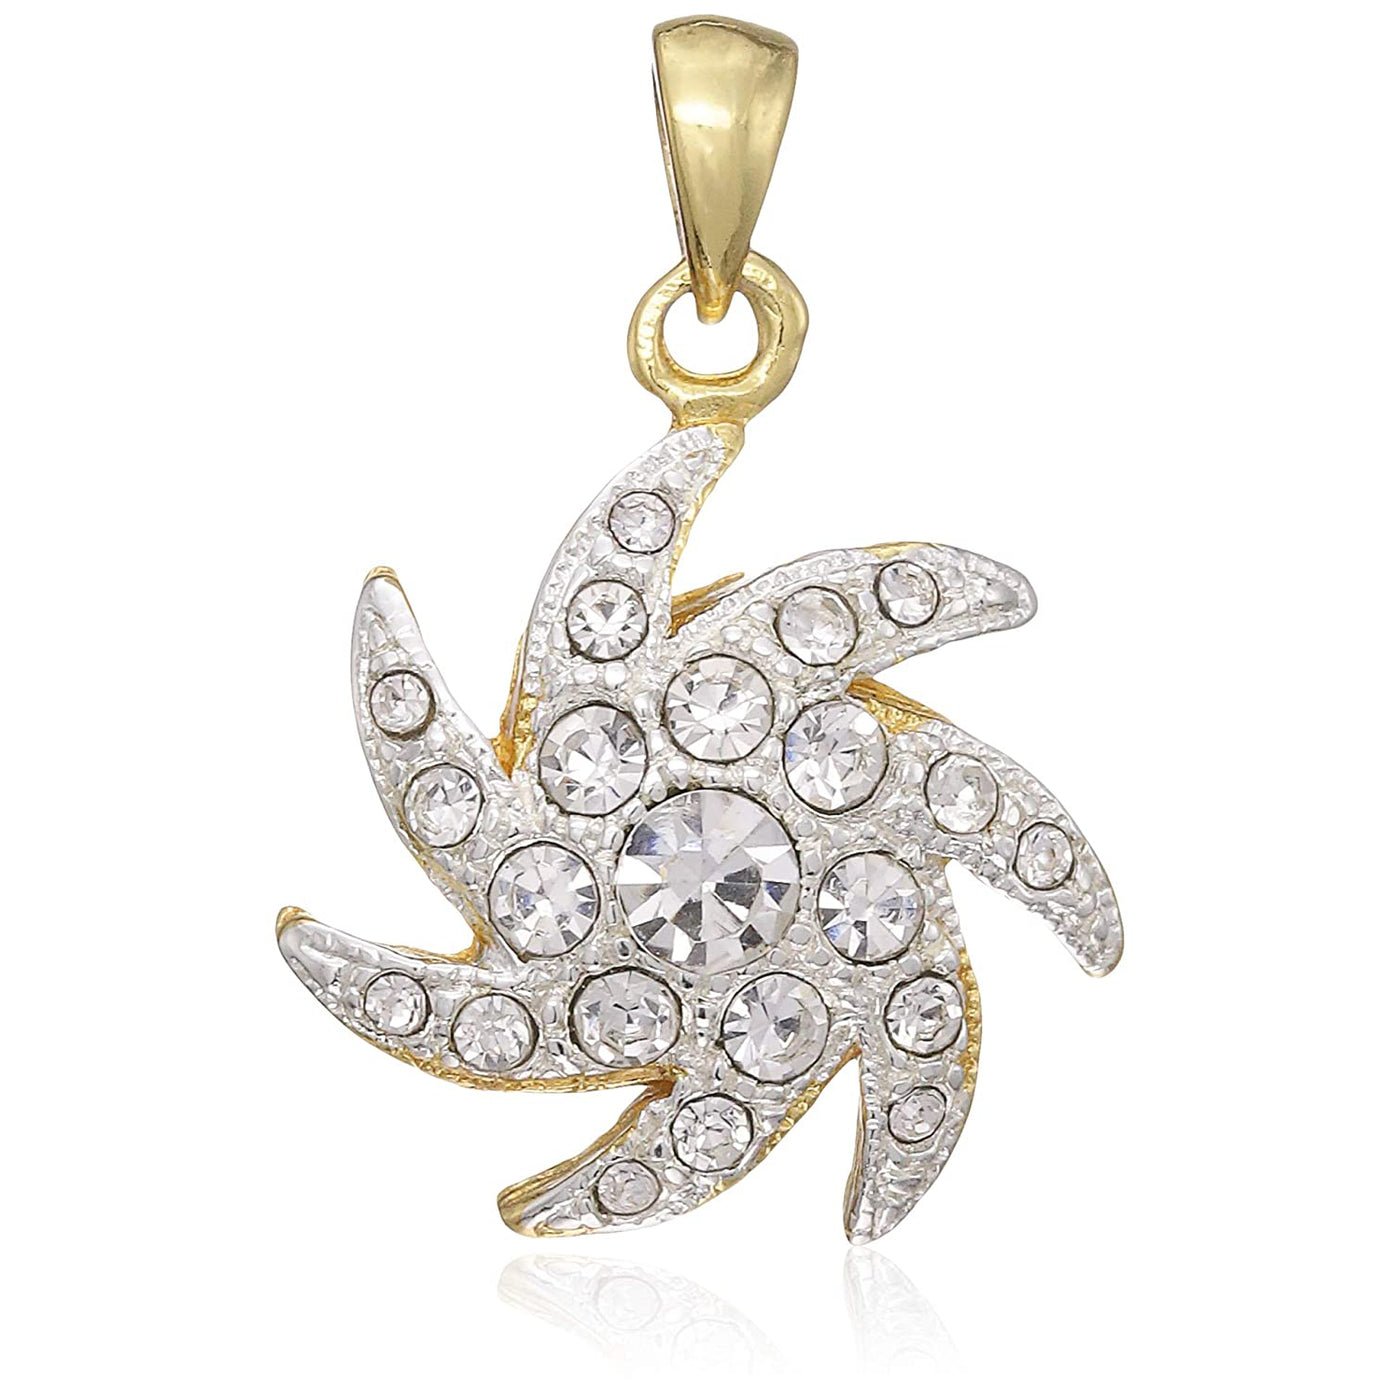 Estele - Gold Plated Flower Shaped Pendant with Austrian Crystals for Women / Girls